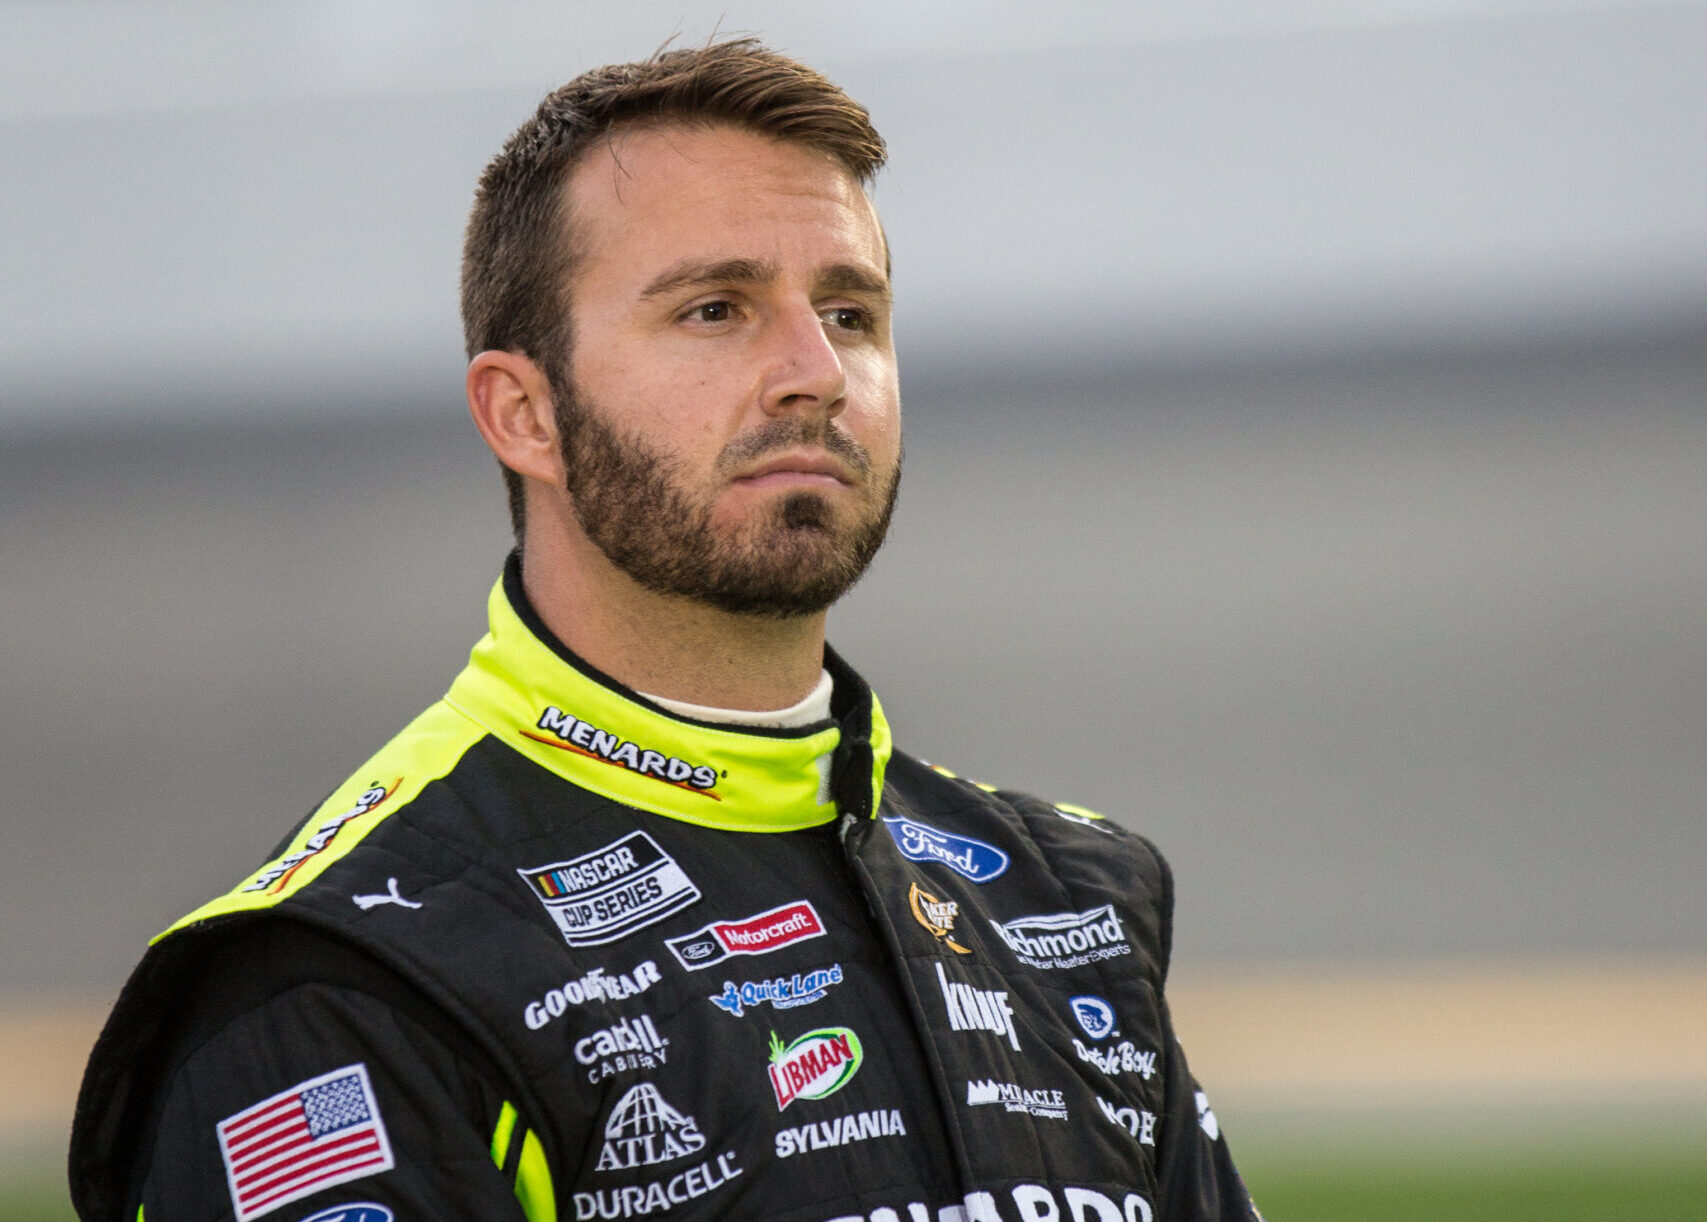 While Matt DiBenedetto faces an uncertain future, he hopes to win the 100th Cup race for the No. 21 Wood Brothers Racing team. (Photo: Jonathan Huff | The Podium Finish)